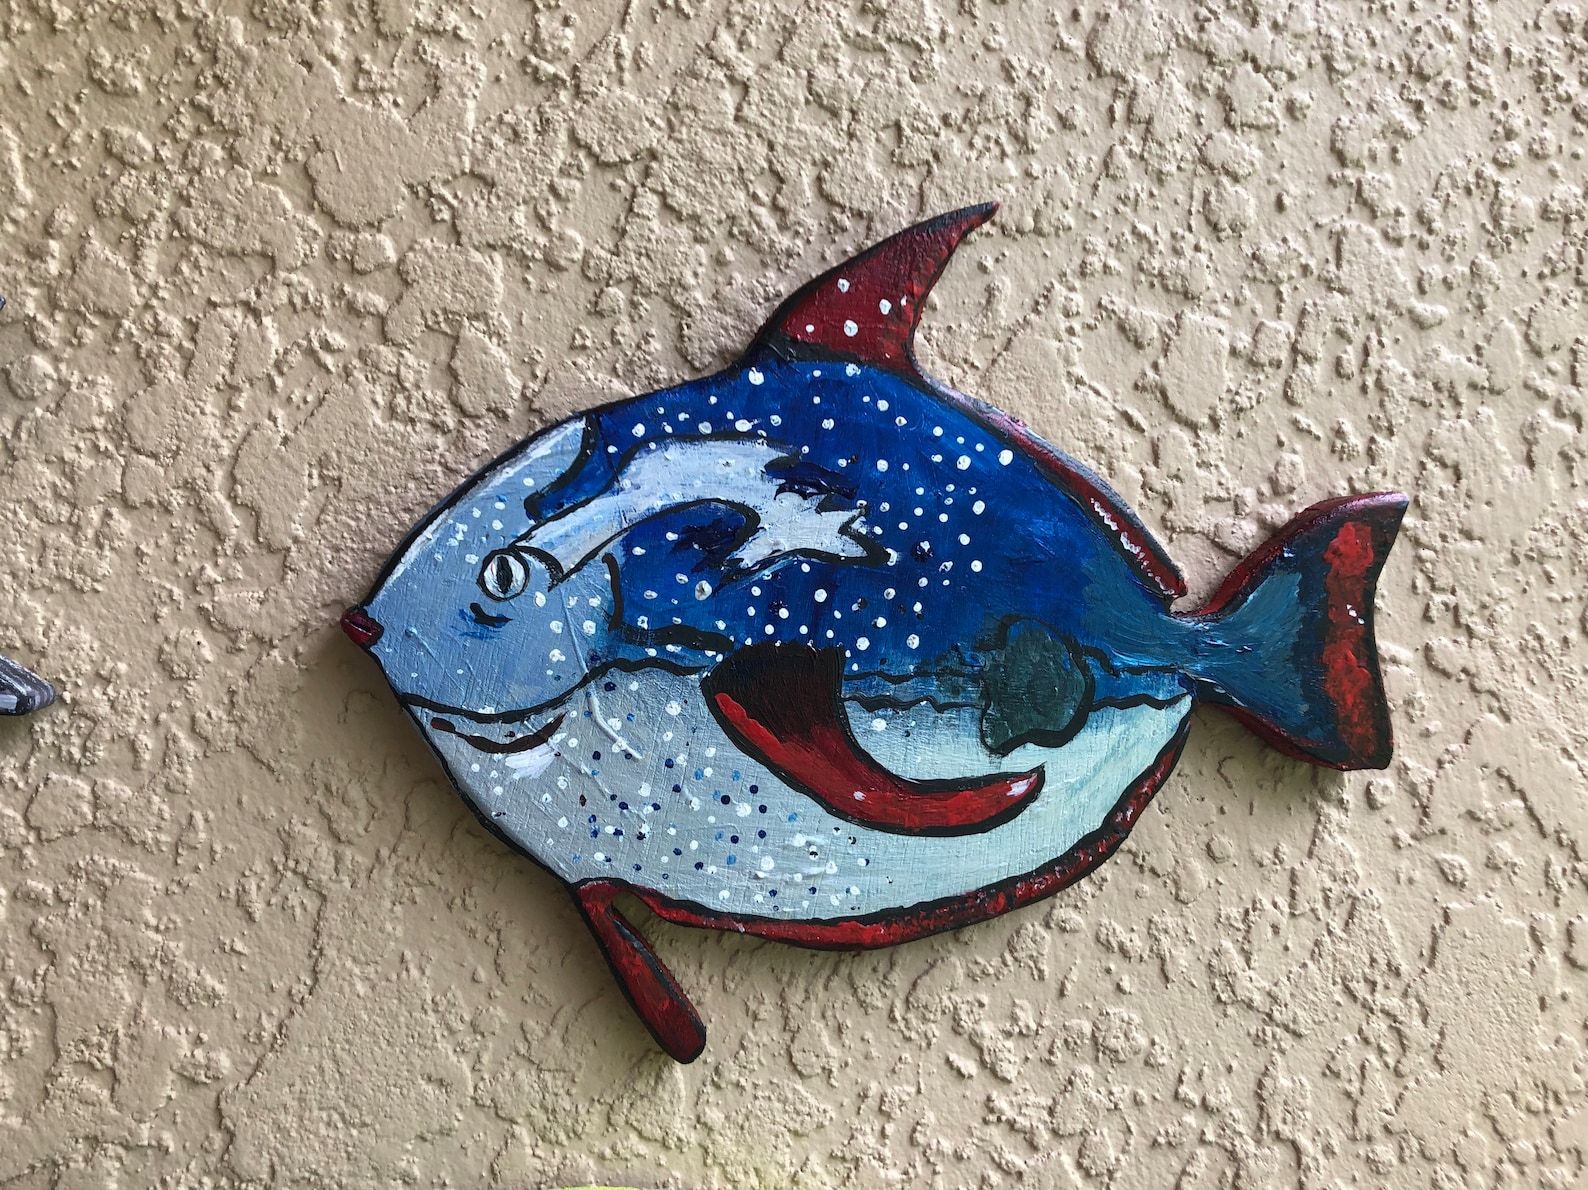 Luna Hand Painted Opah Moon Fish Wooden Wall Decor | Etsy In Recent Luna Wood Wall Art (View 2 of 20)